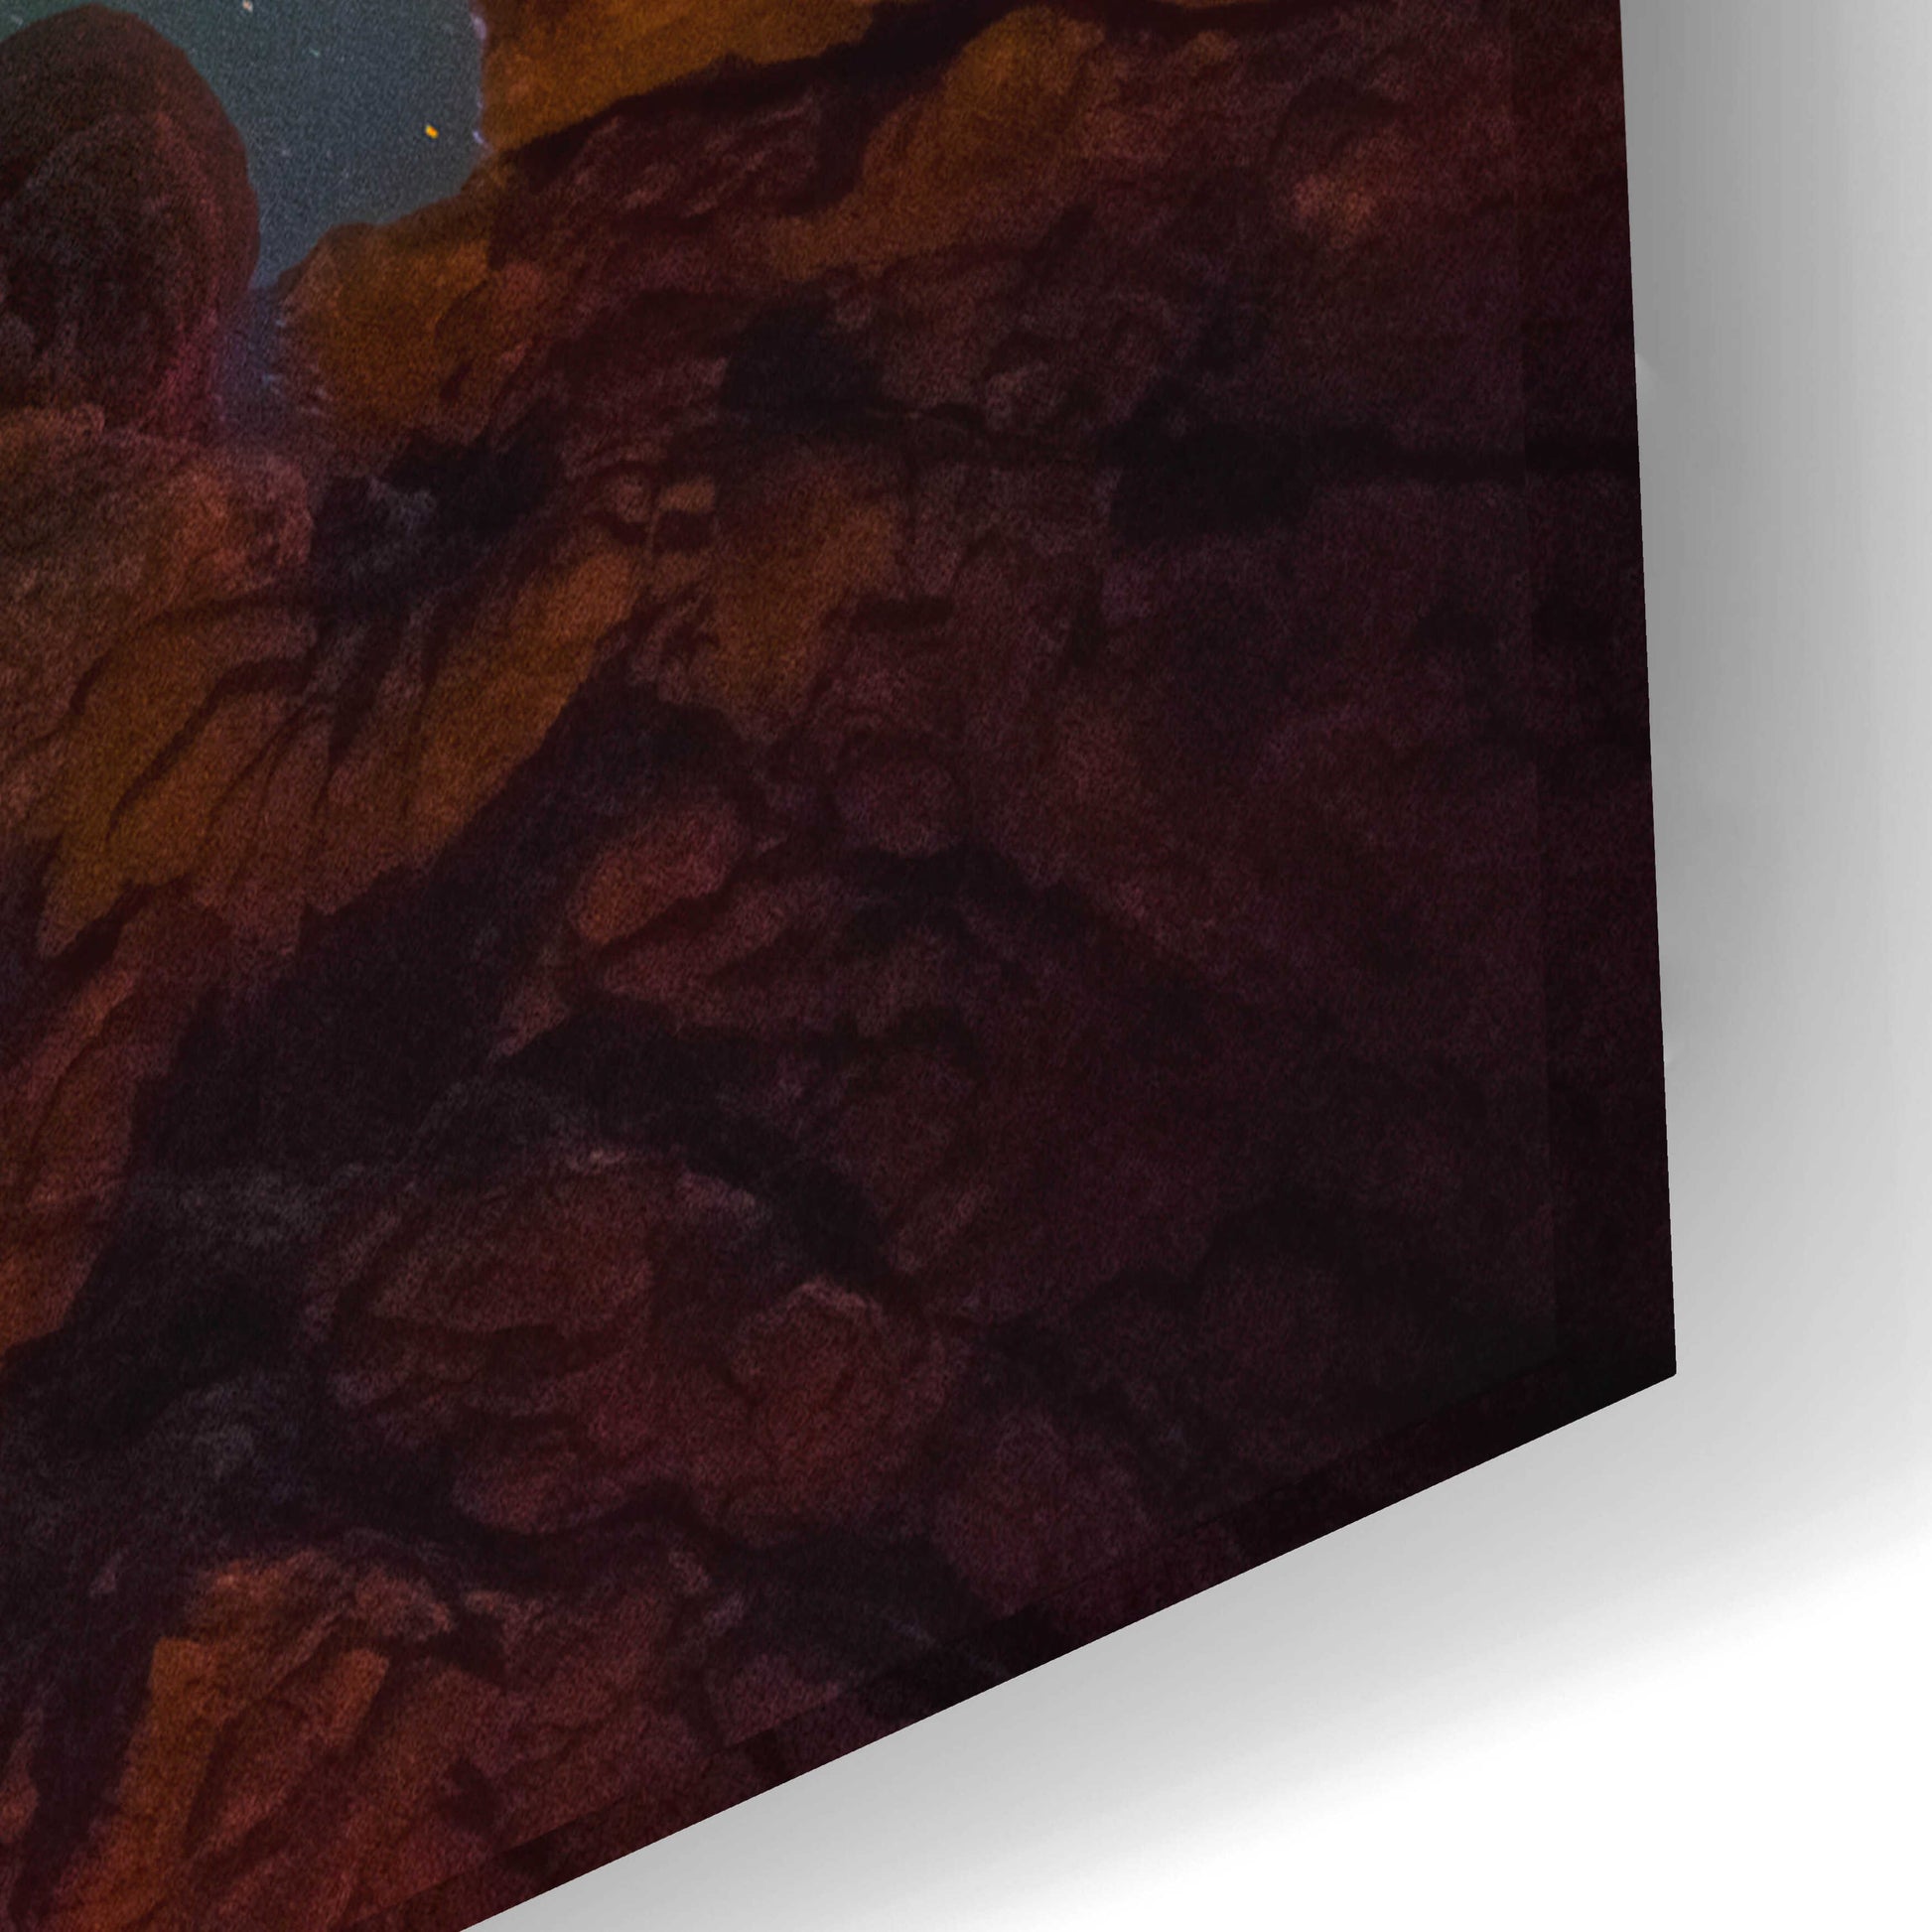 Epic Art 'Window to the Heavens - Arches National Park' by Darren White, Acrylic Glass Wall Art,24x16